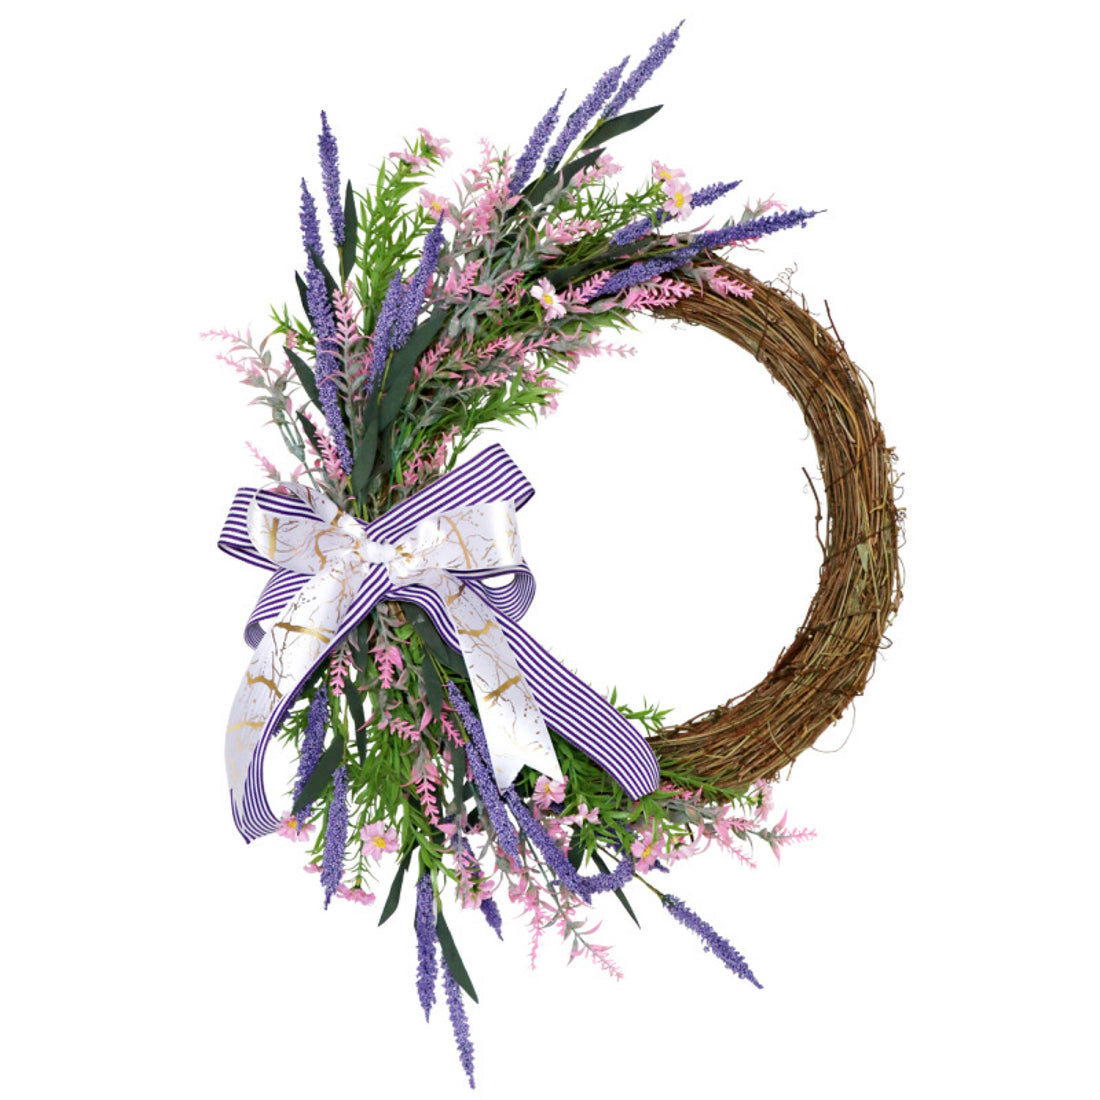 DIY Guide: Create a Stunning Artificial Flower Wreath to Welcome Spring!